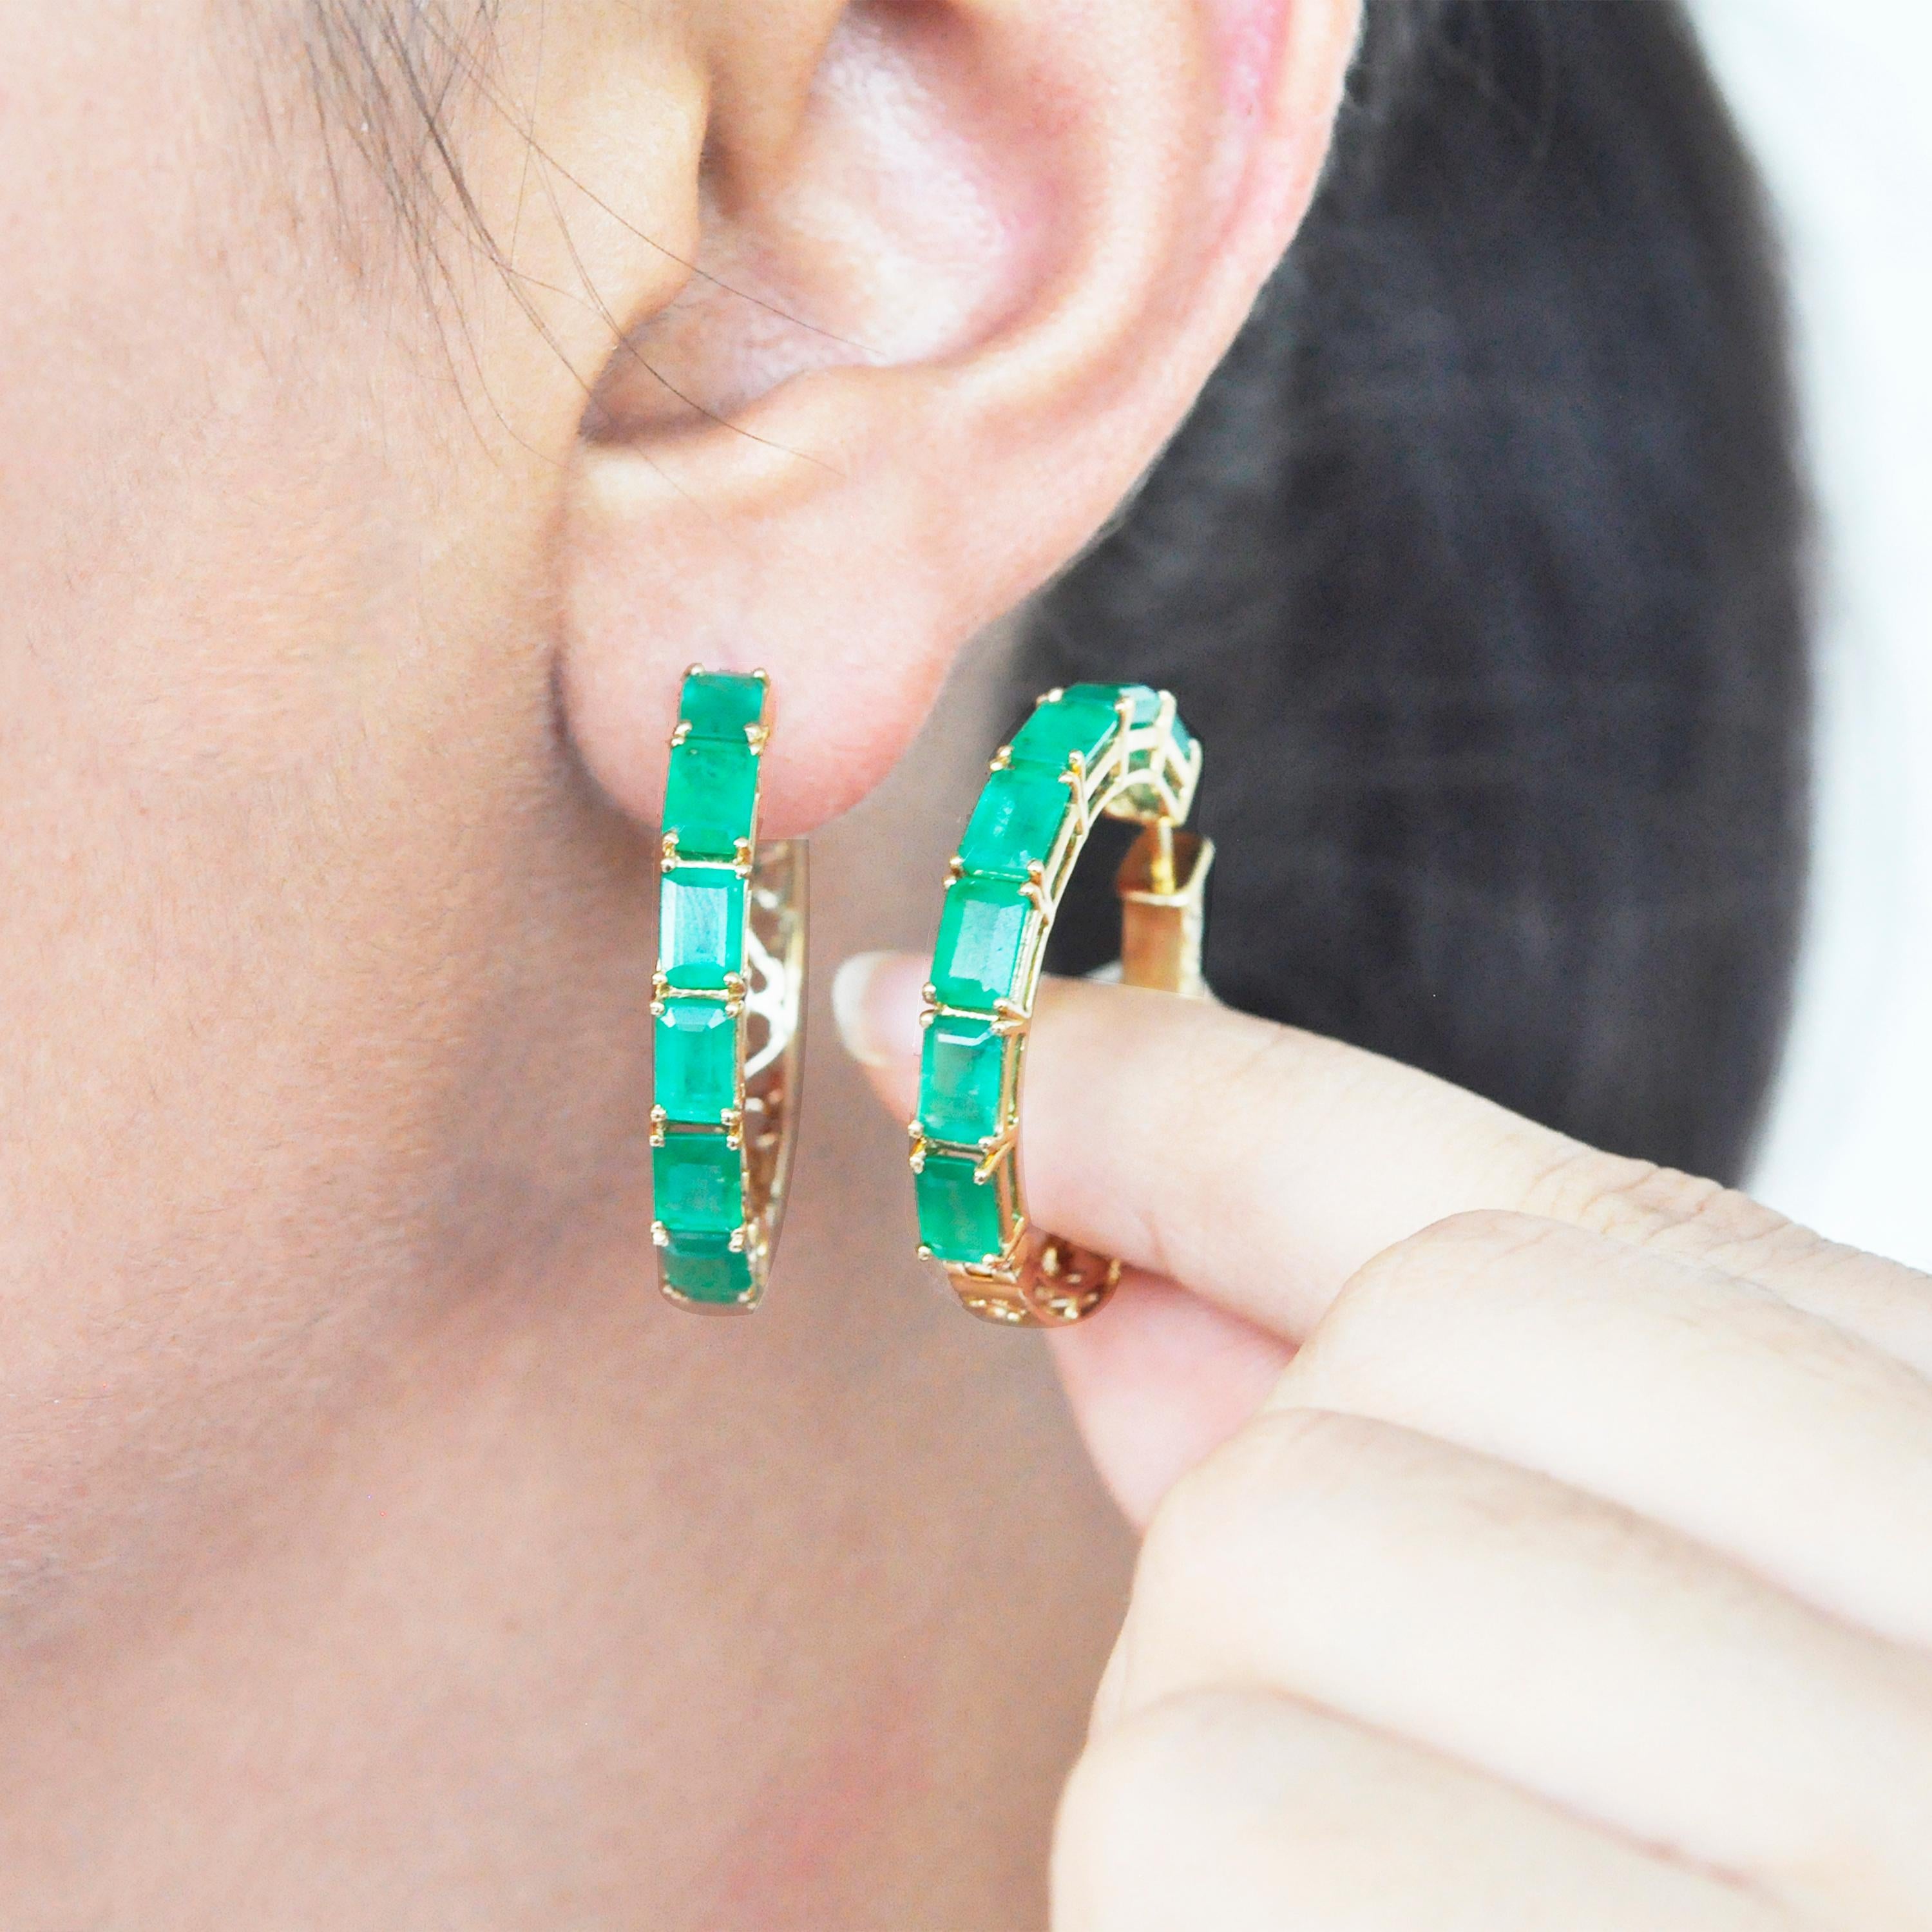 18 karat yellow gold emerald cut octagon brazilian emerald hoop earrings. 

This enchanting lush green brazilian emeralds hoop earring is impressive. The hoop is created with 12 perfect matching emerald cut emeralds of size 6x4 mm each. The prong